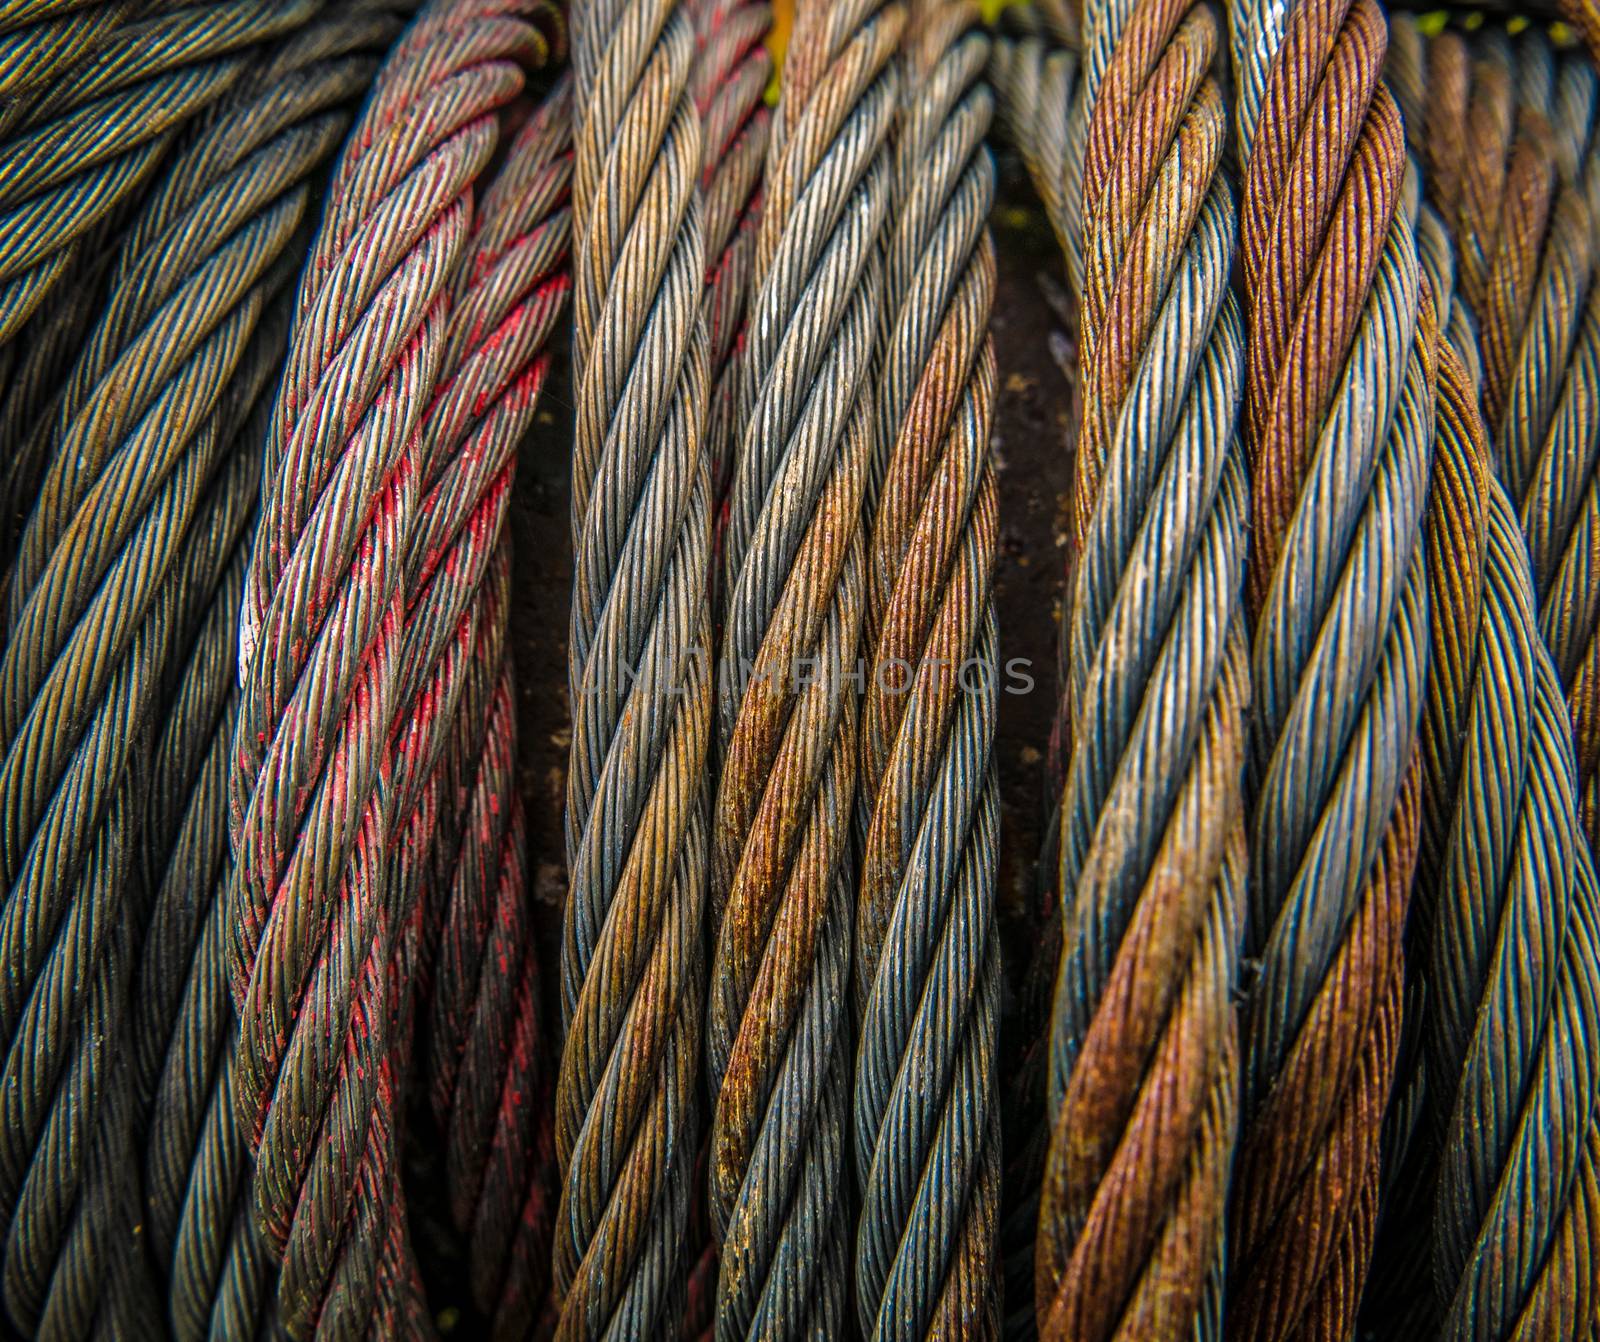 Heavy Duty Metal Cables by mrdoomits